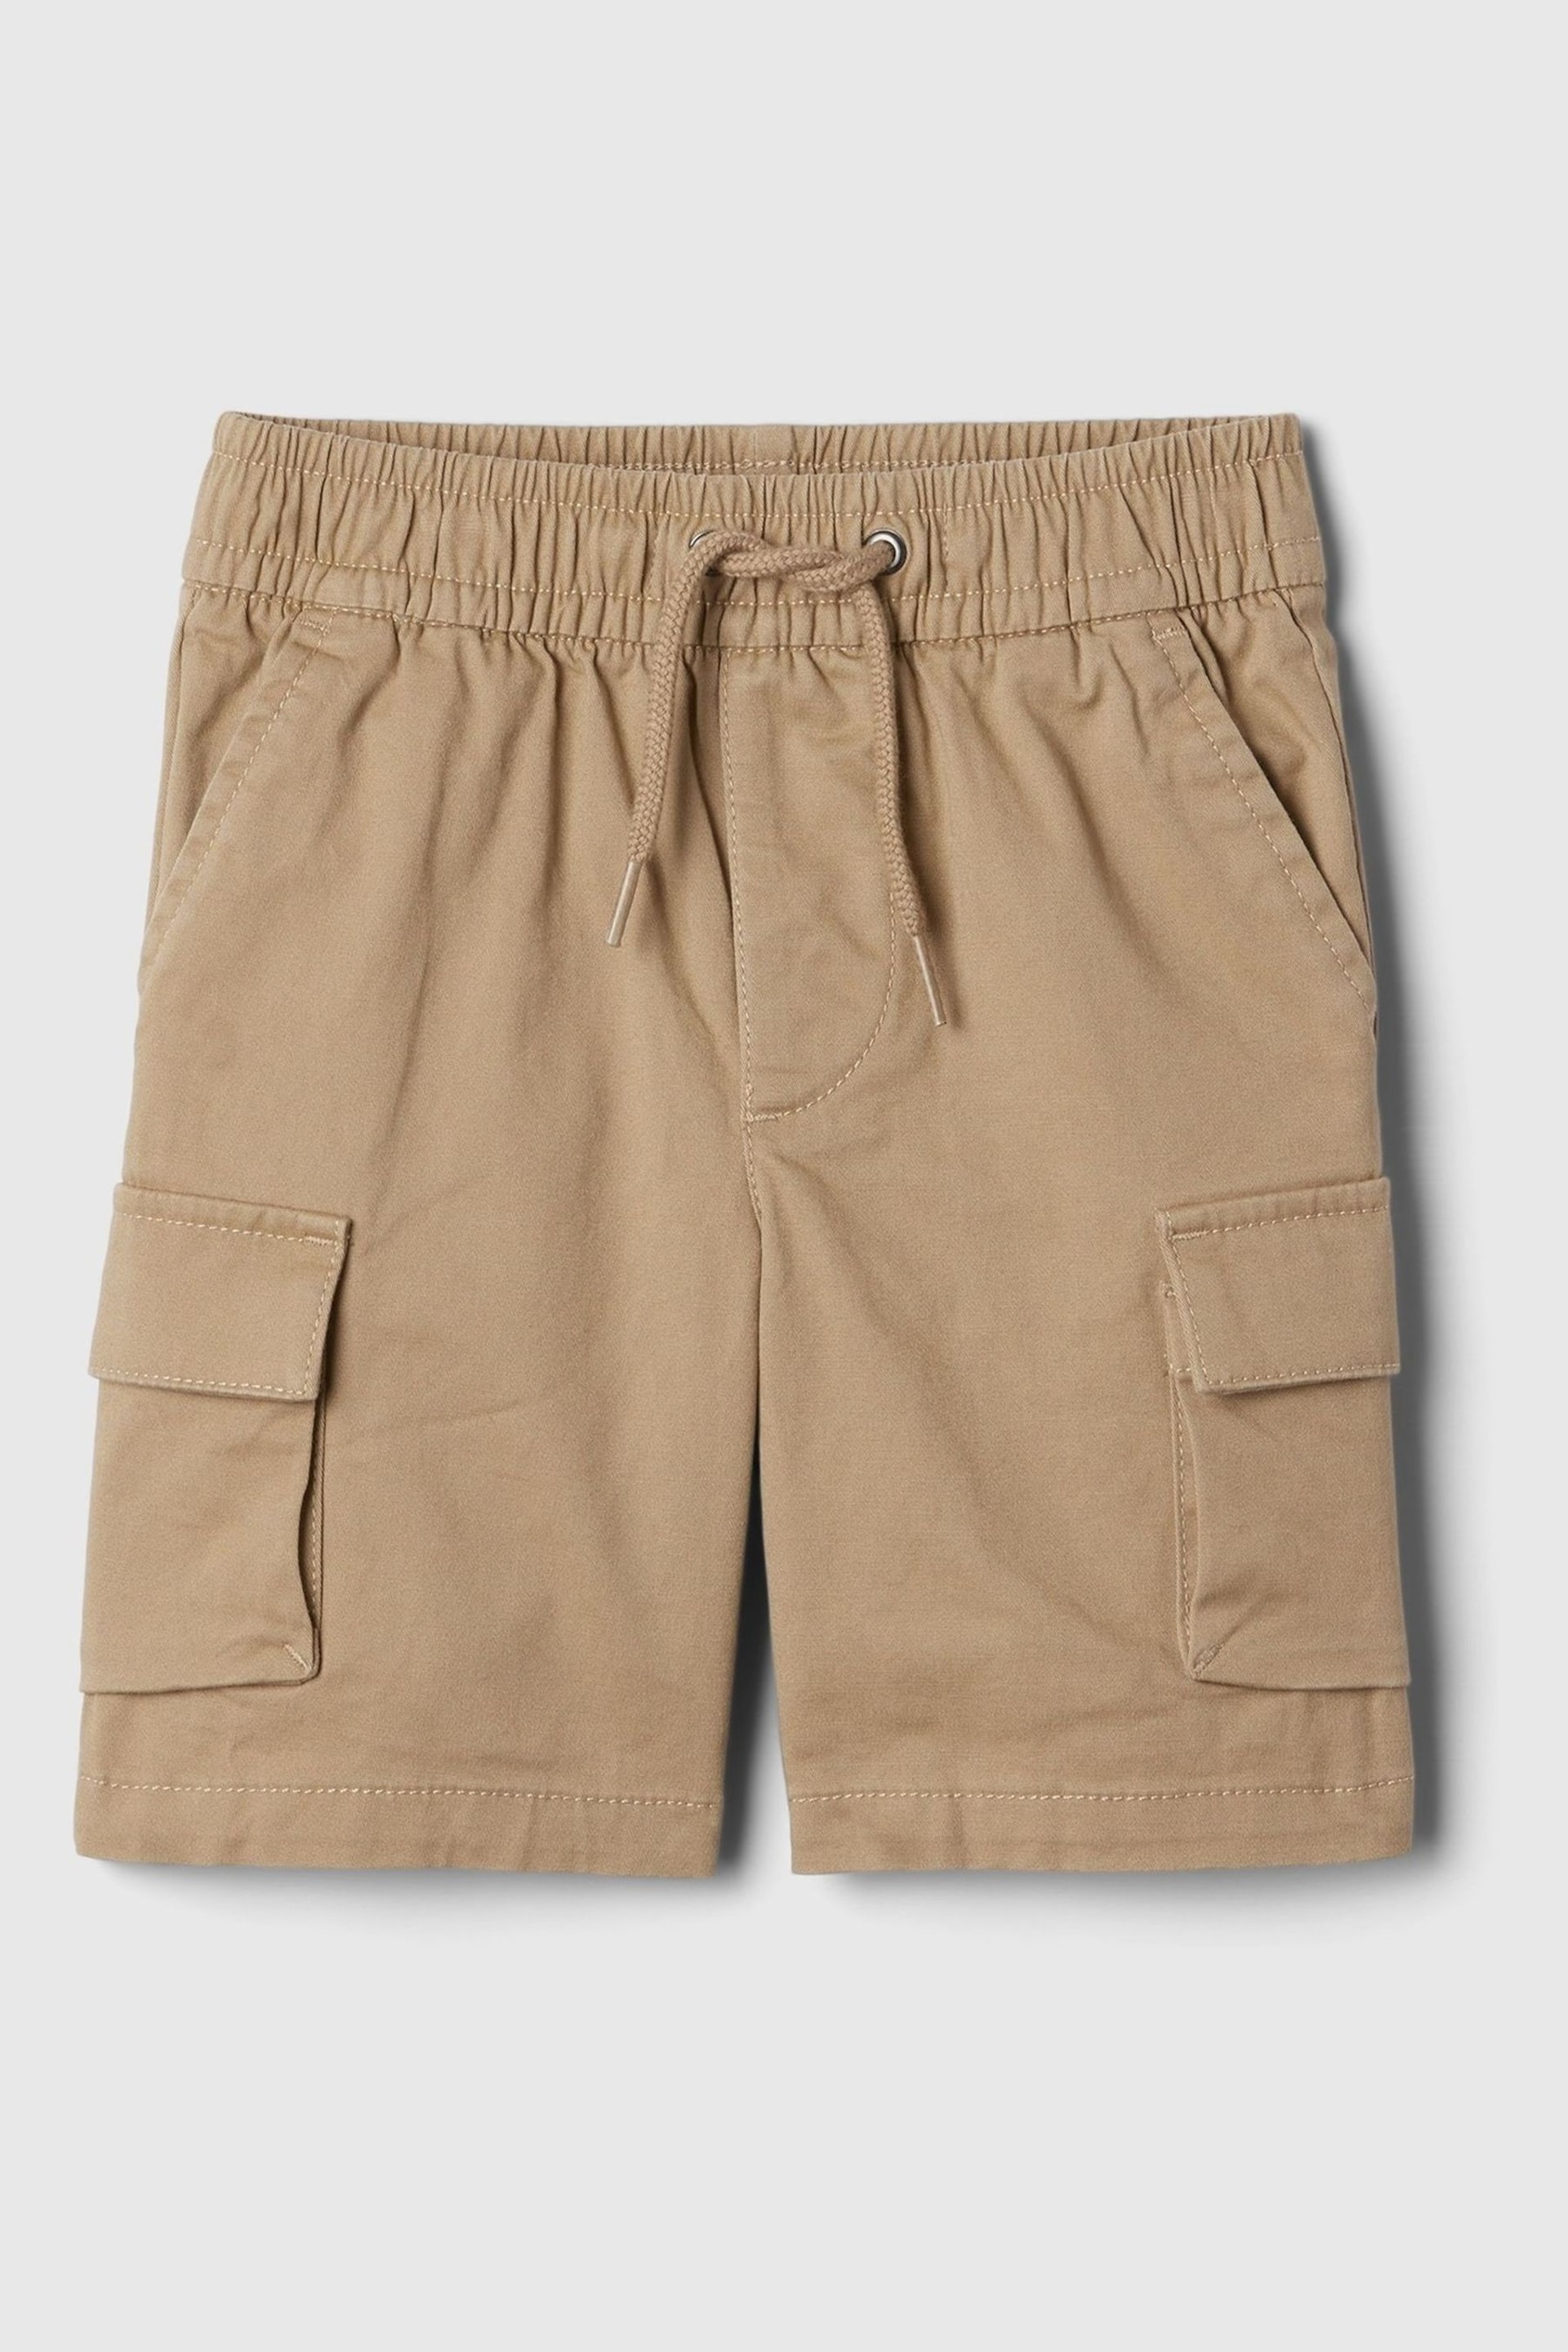 Gap Brown Cotton Twill Pull On Cargo Shorts (12mths-5yrs) - Image 1 of 2